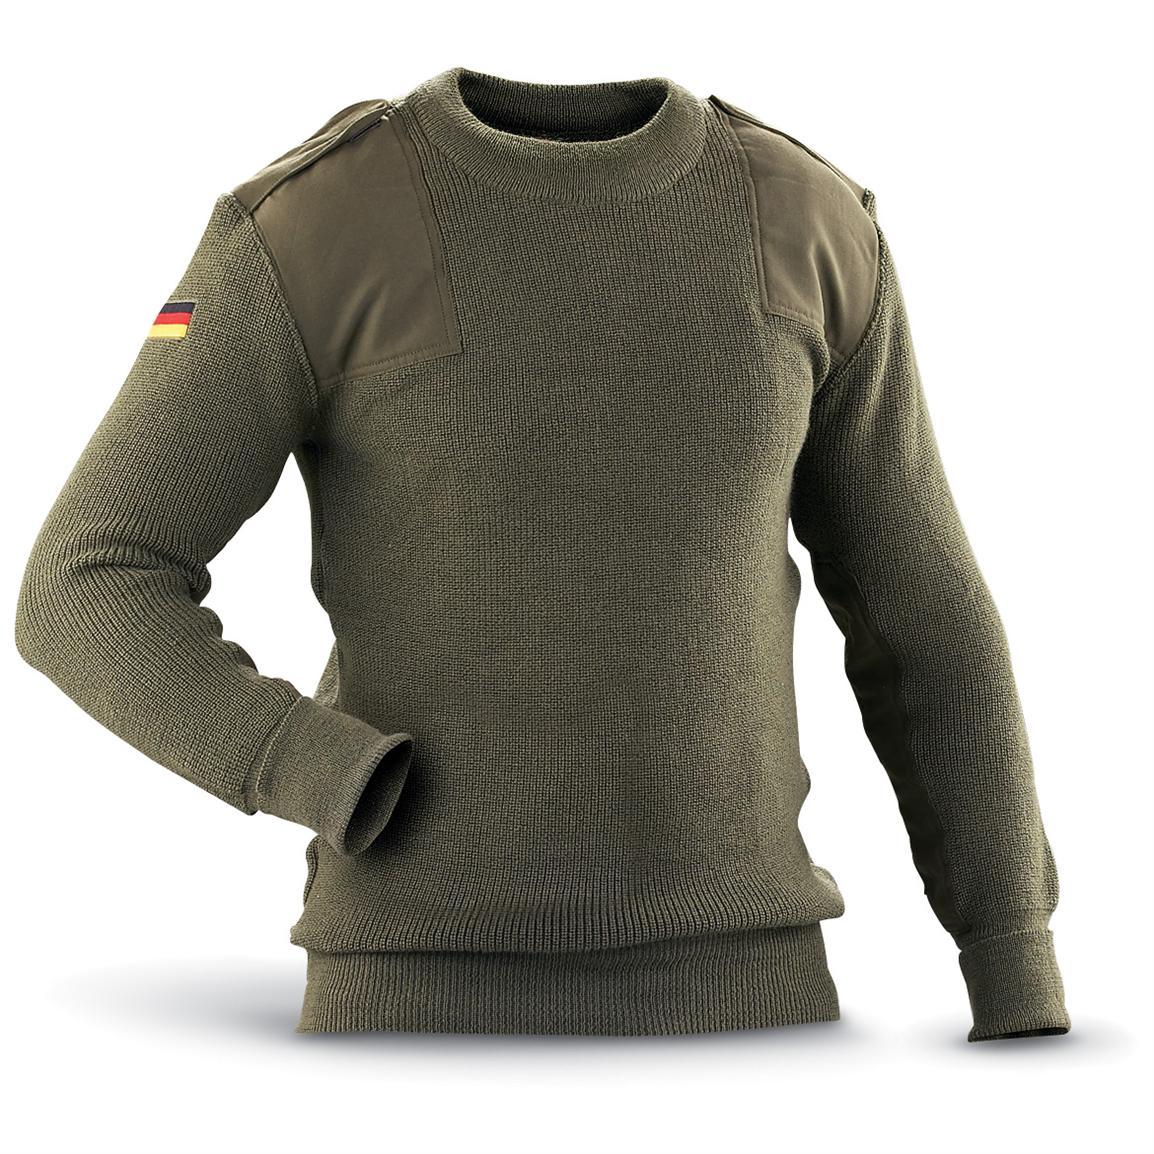 Authentic Spanish Army Officer Commando Sweater Heavy Weave Ultra Comfortable 